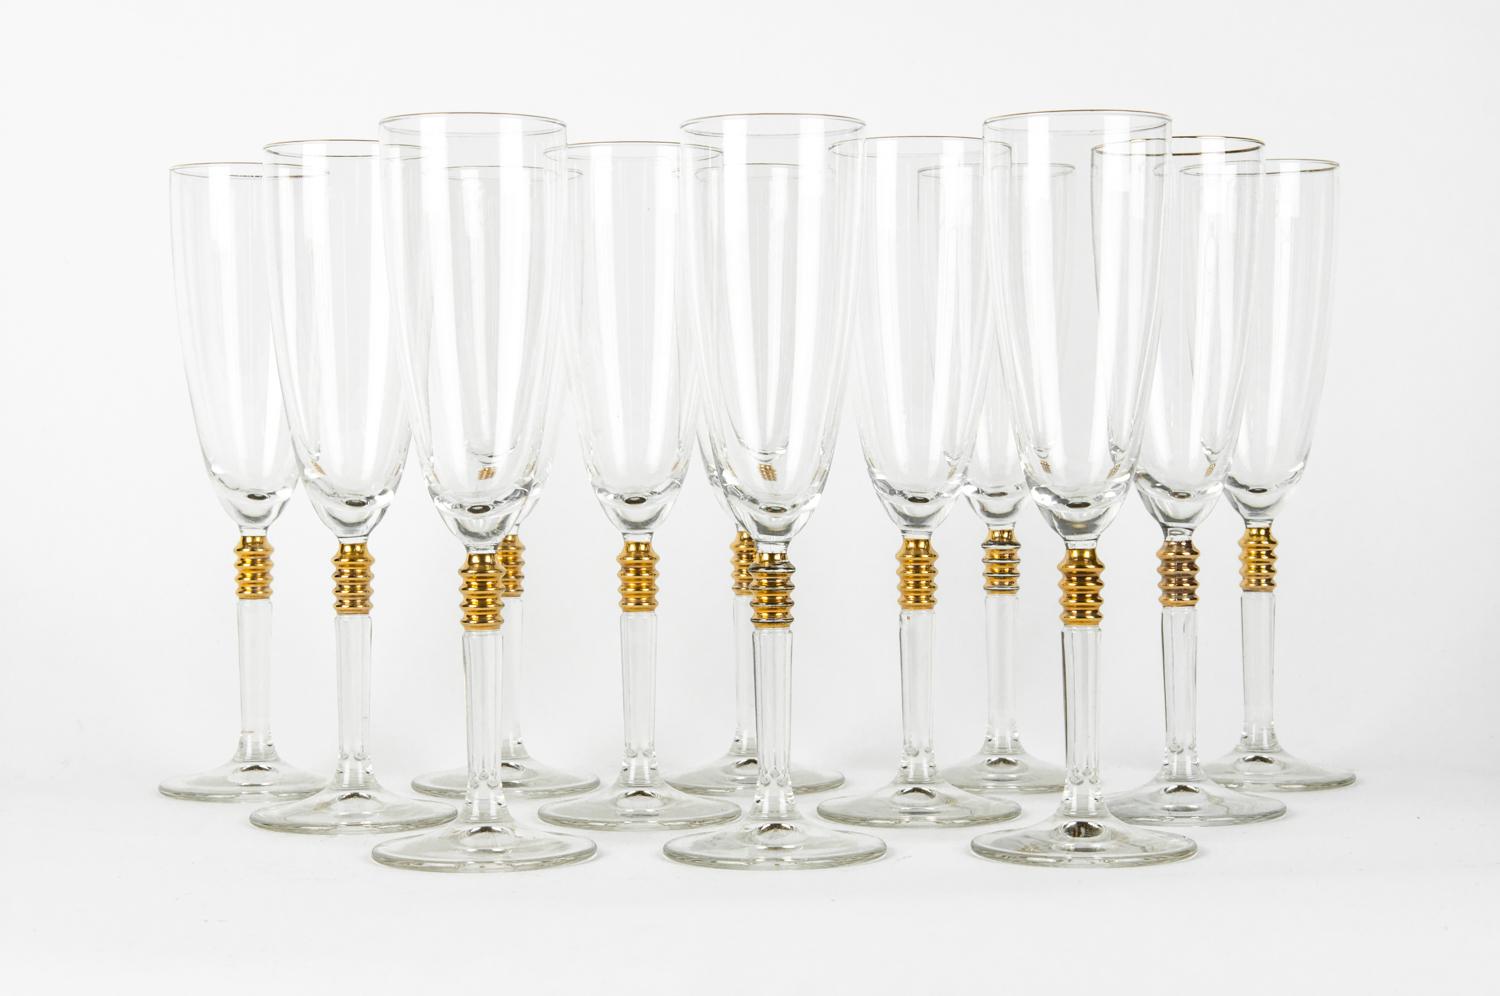 Mid-20th Century Vintage Crystal with Gold Design Champagne Flute Set of 12